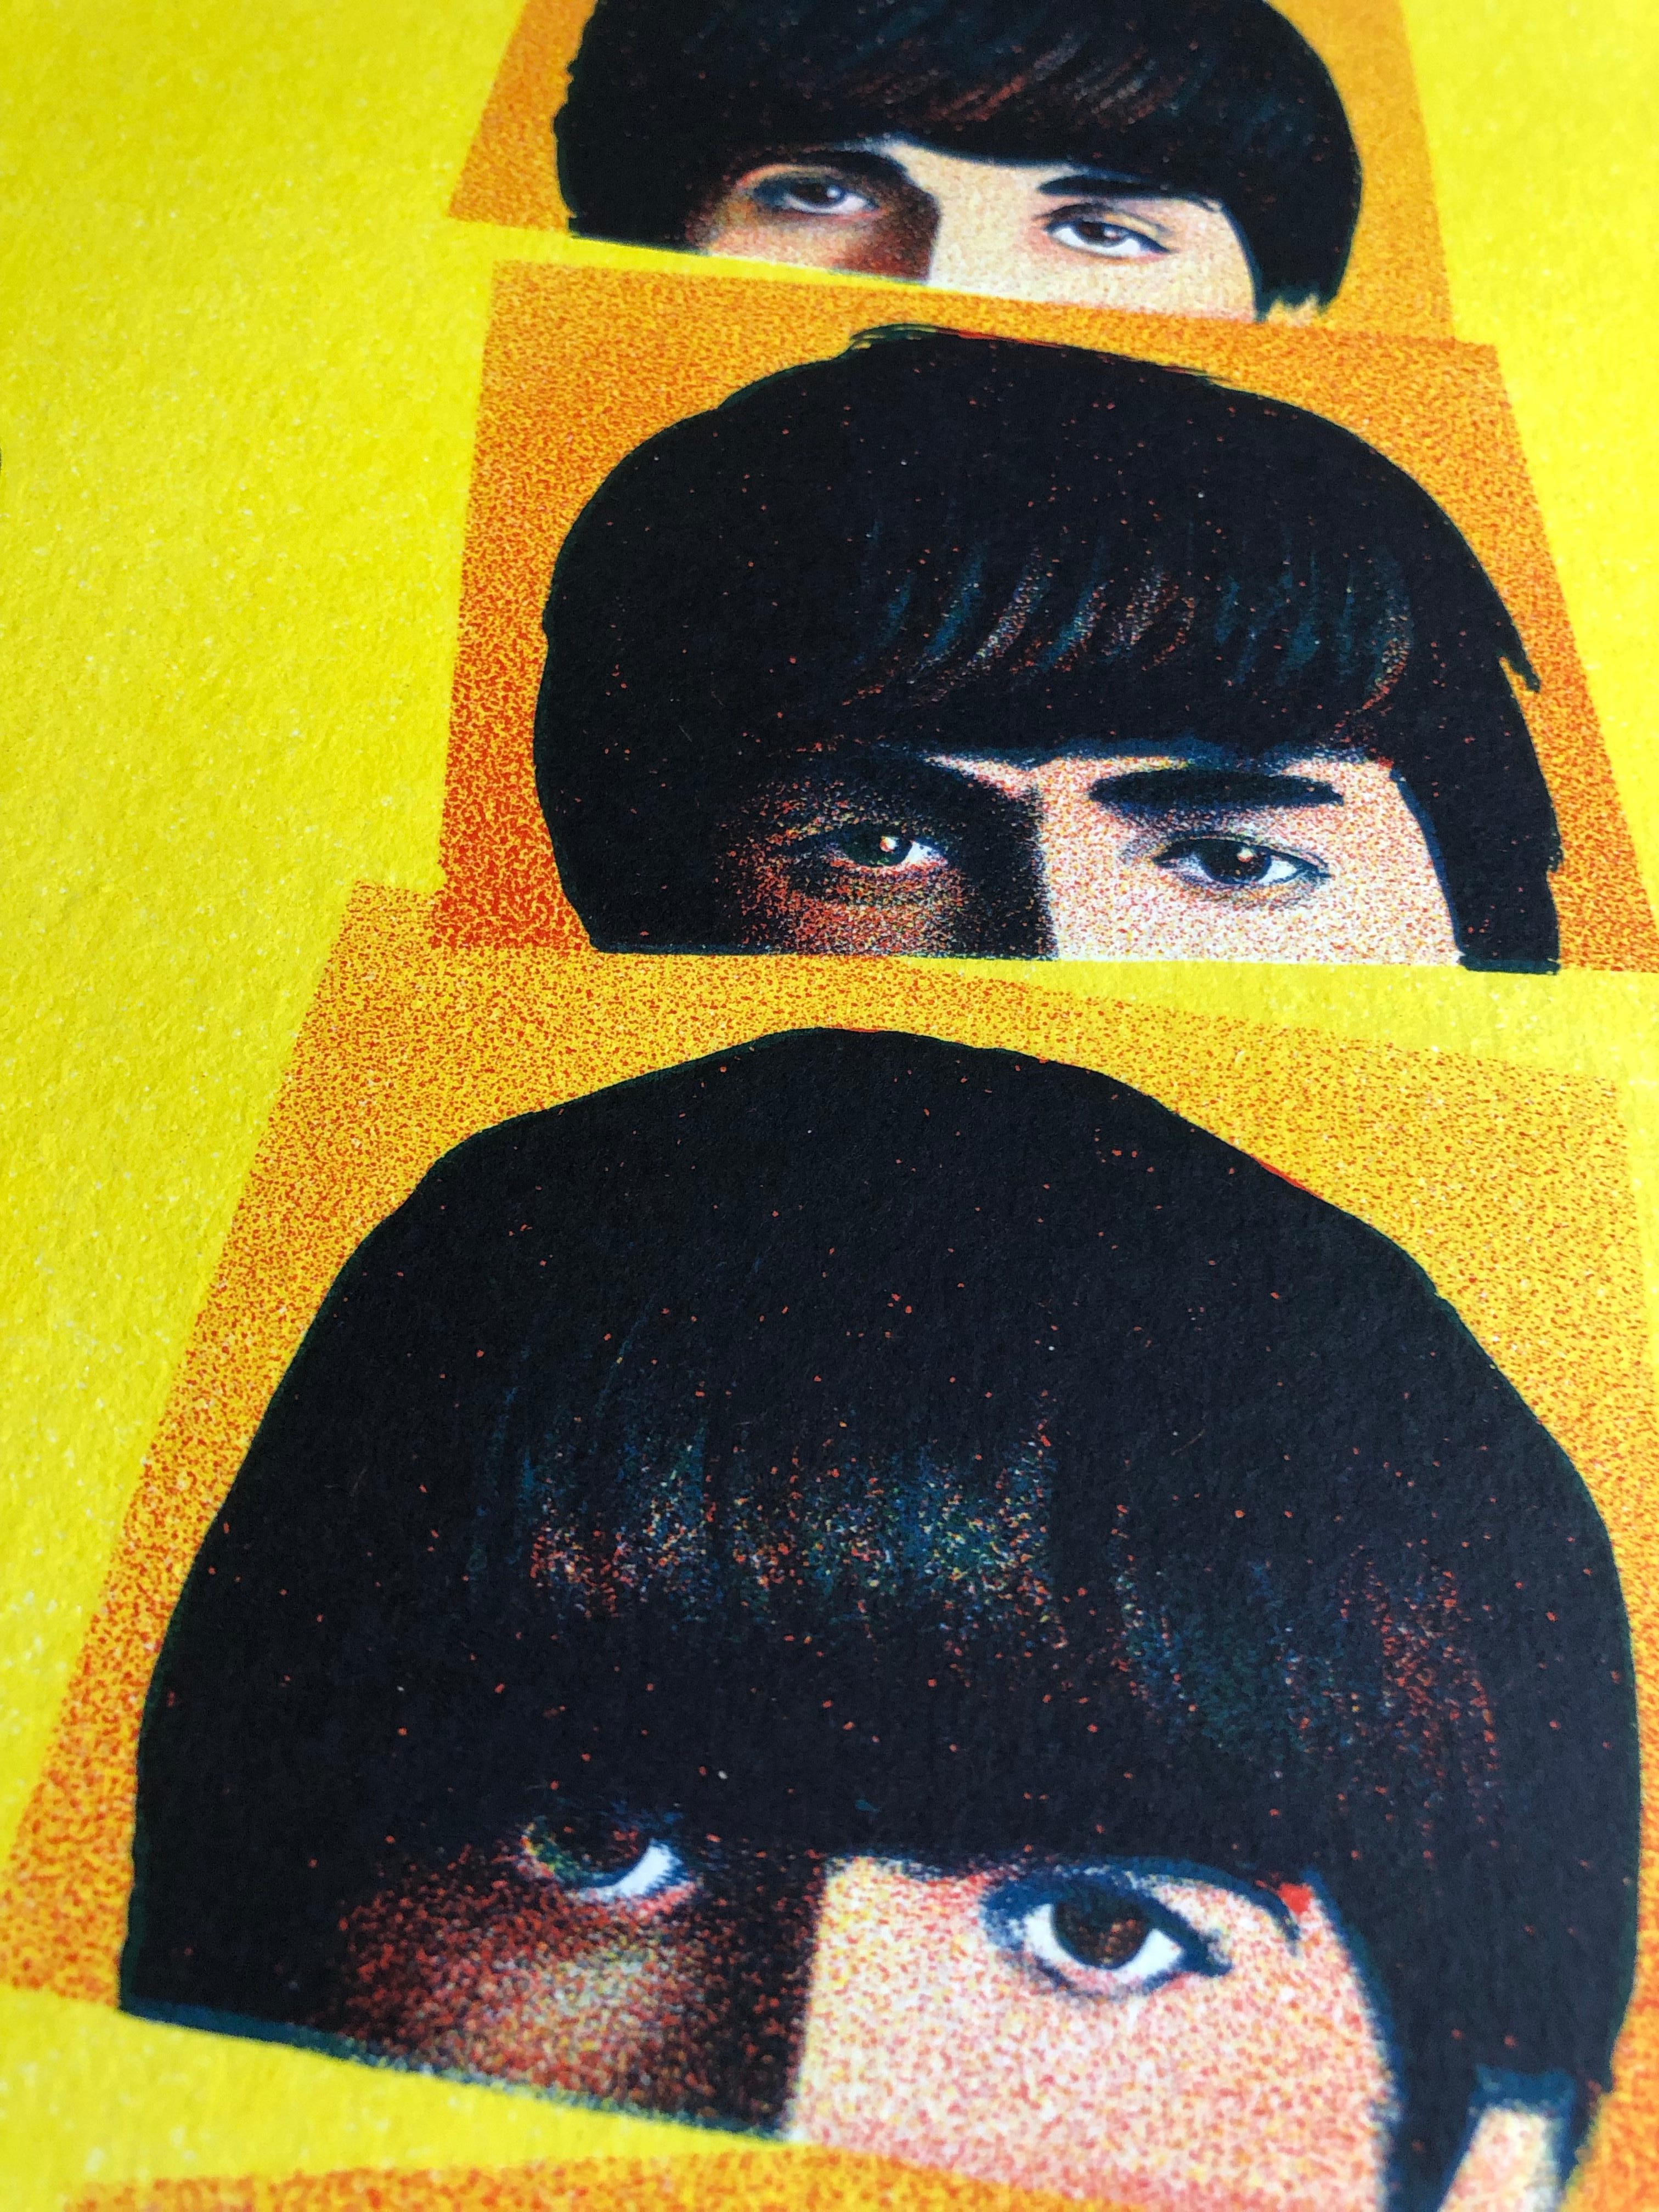 A stunning stone lithography poster for The Beatles' first full-length feature film 